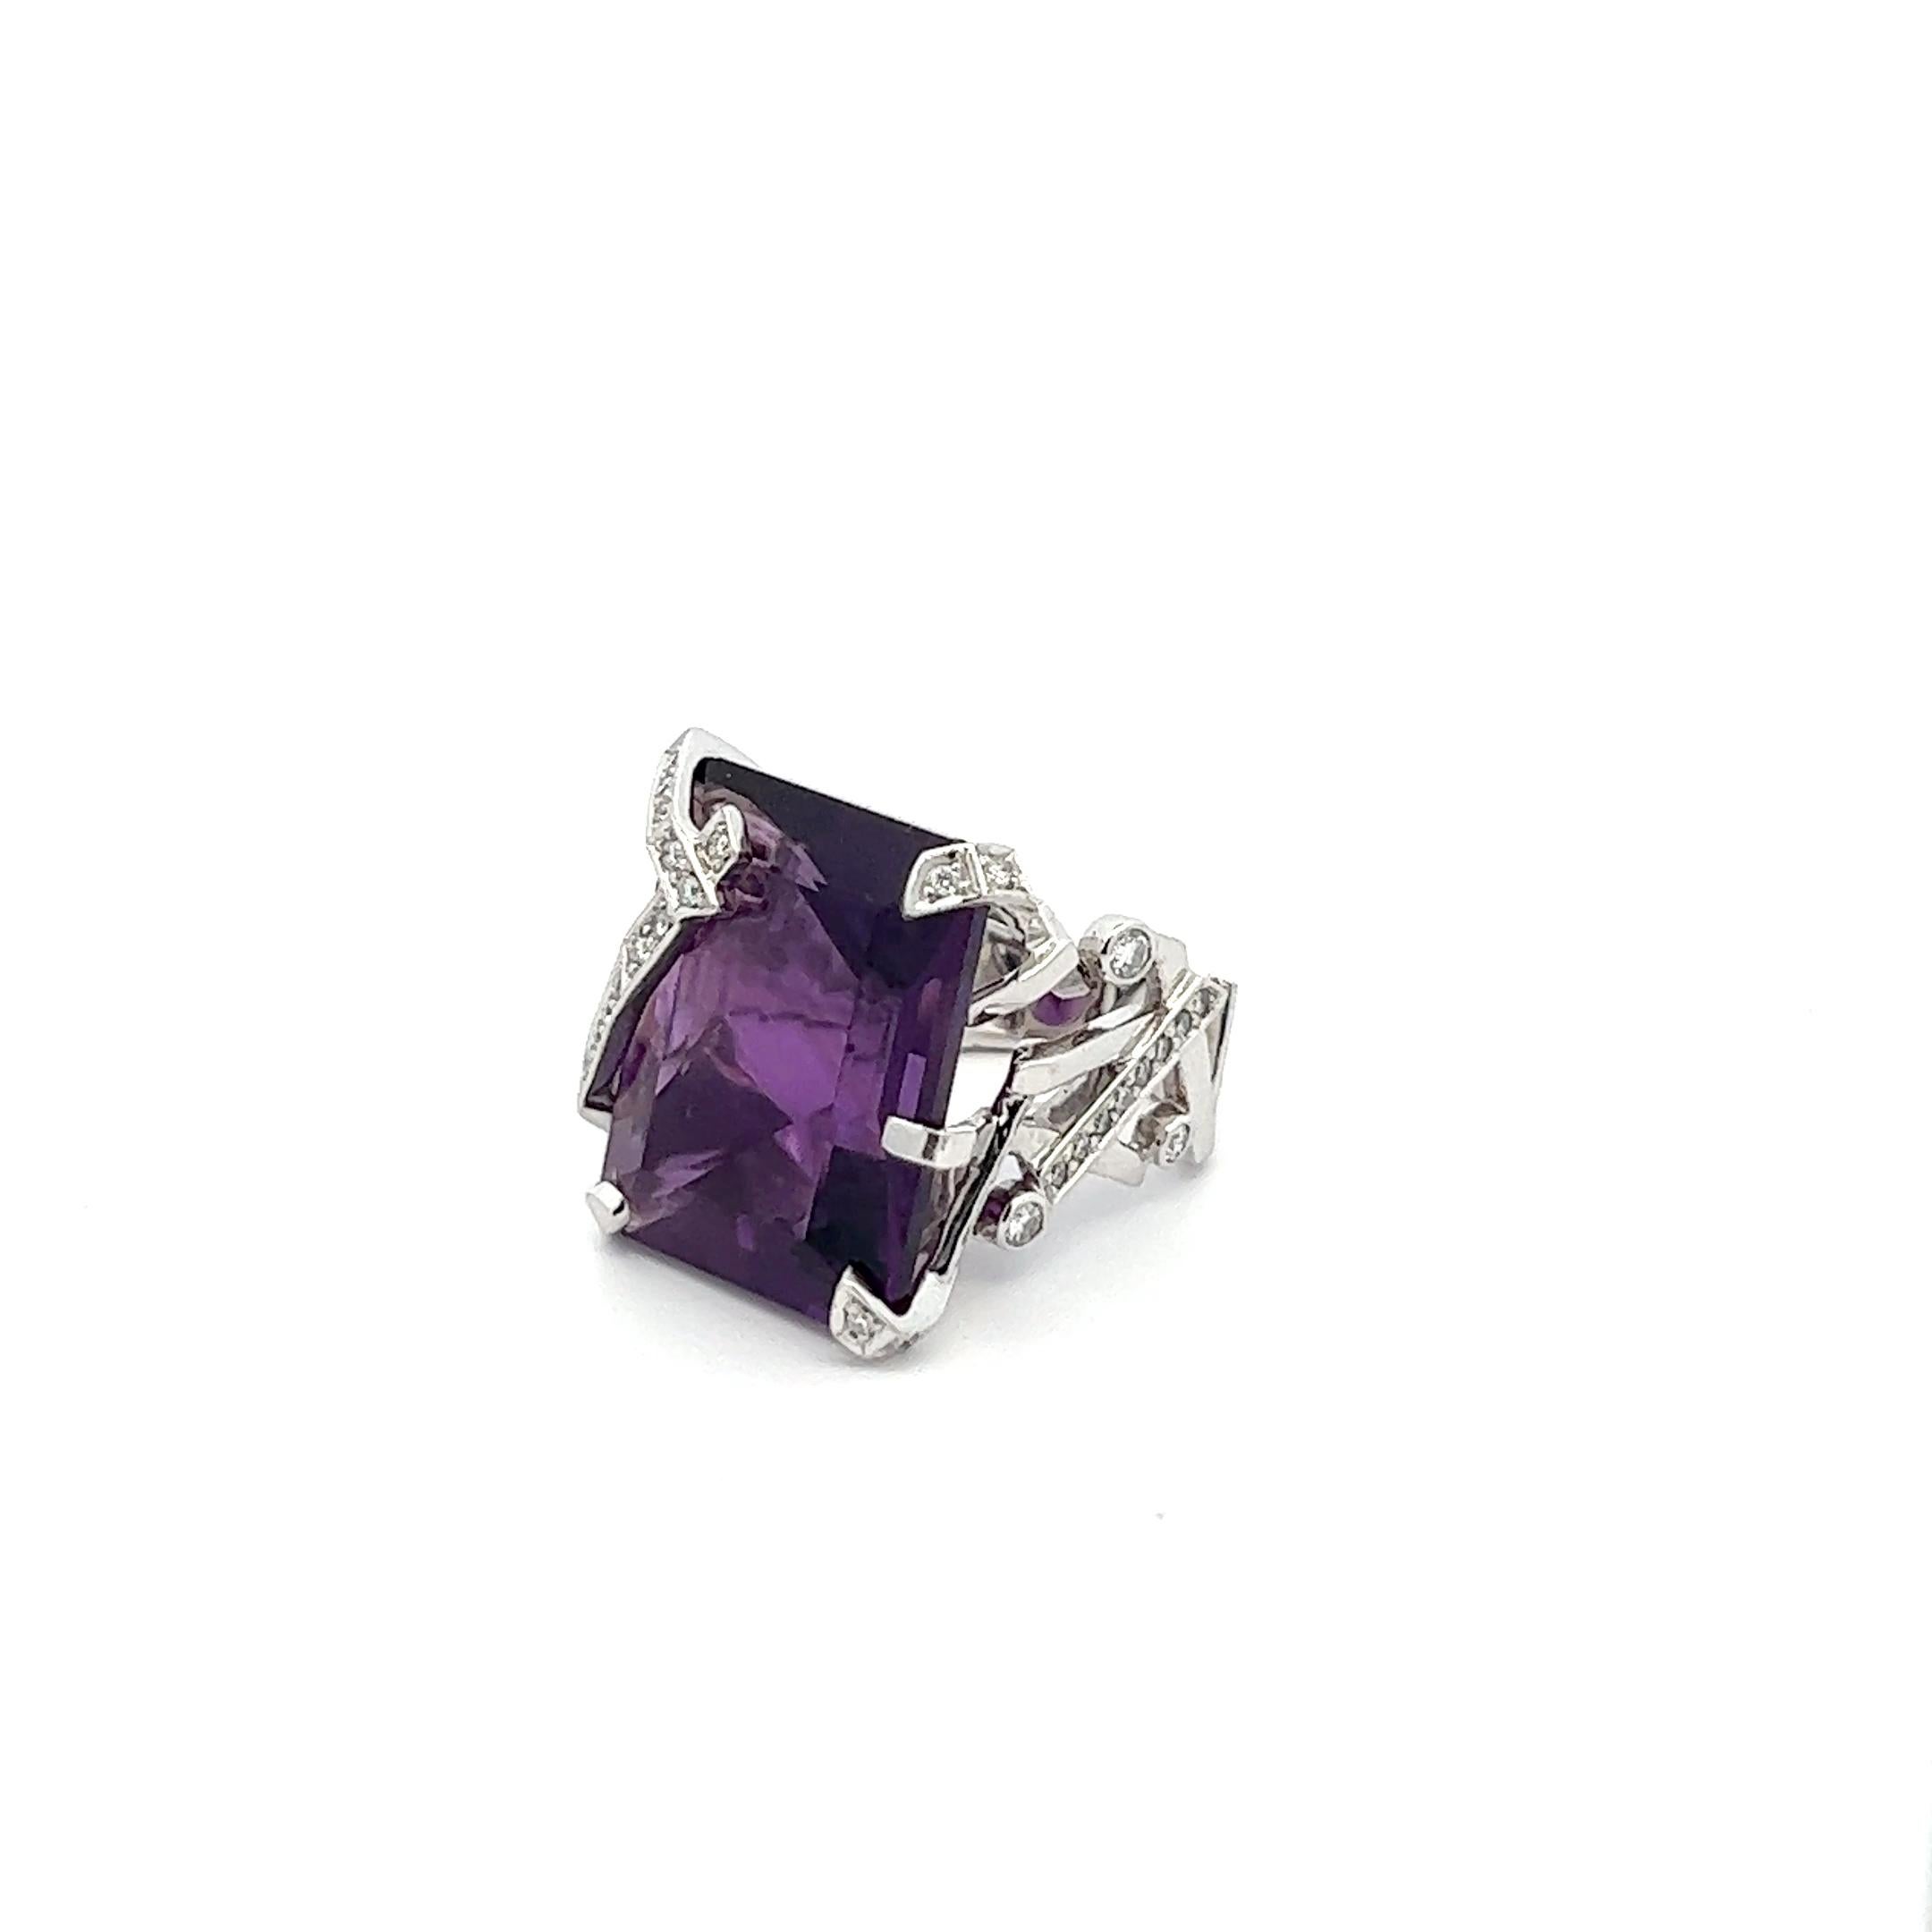 Very rare ring, made of 18k white gold and a deep purple Amethyst, by Chanel.
Total Diamond weight: circa 1.8ct.
Weight: circa 20.4 grams.
Ring size: European 51 (can be resized by a good goldsmith)
Marked with the French hallmark for 18k gold.